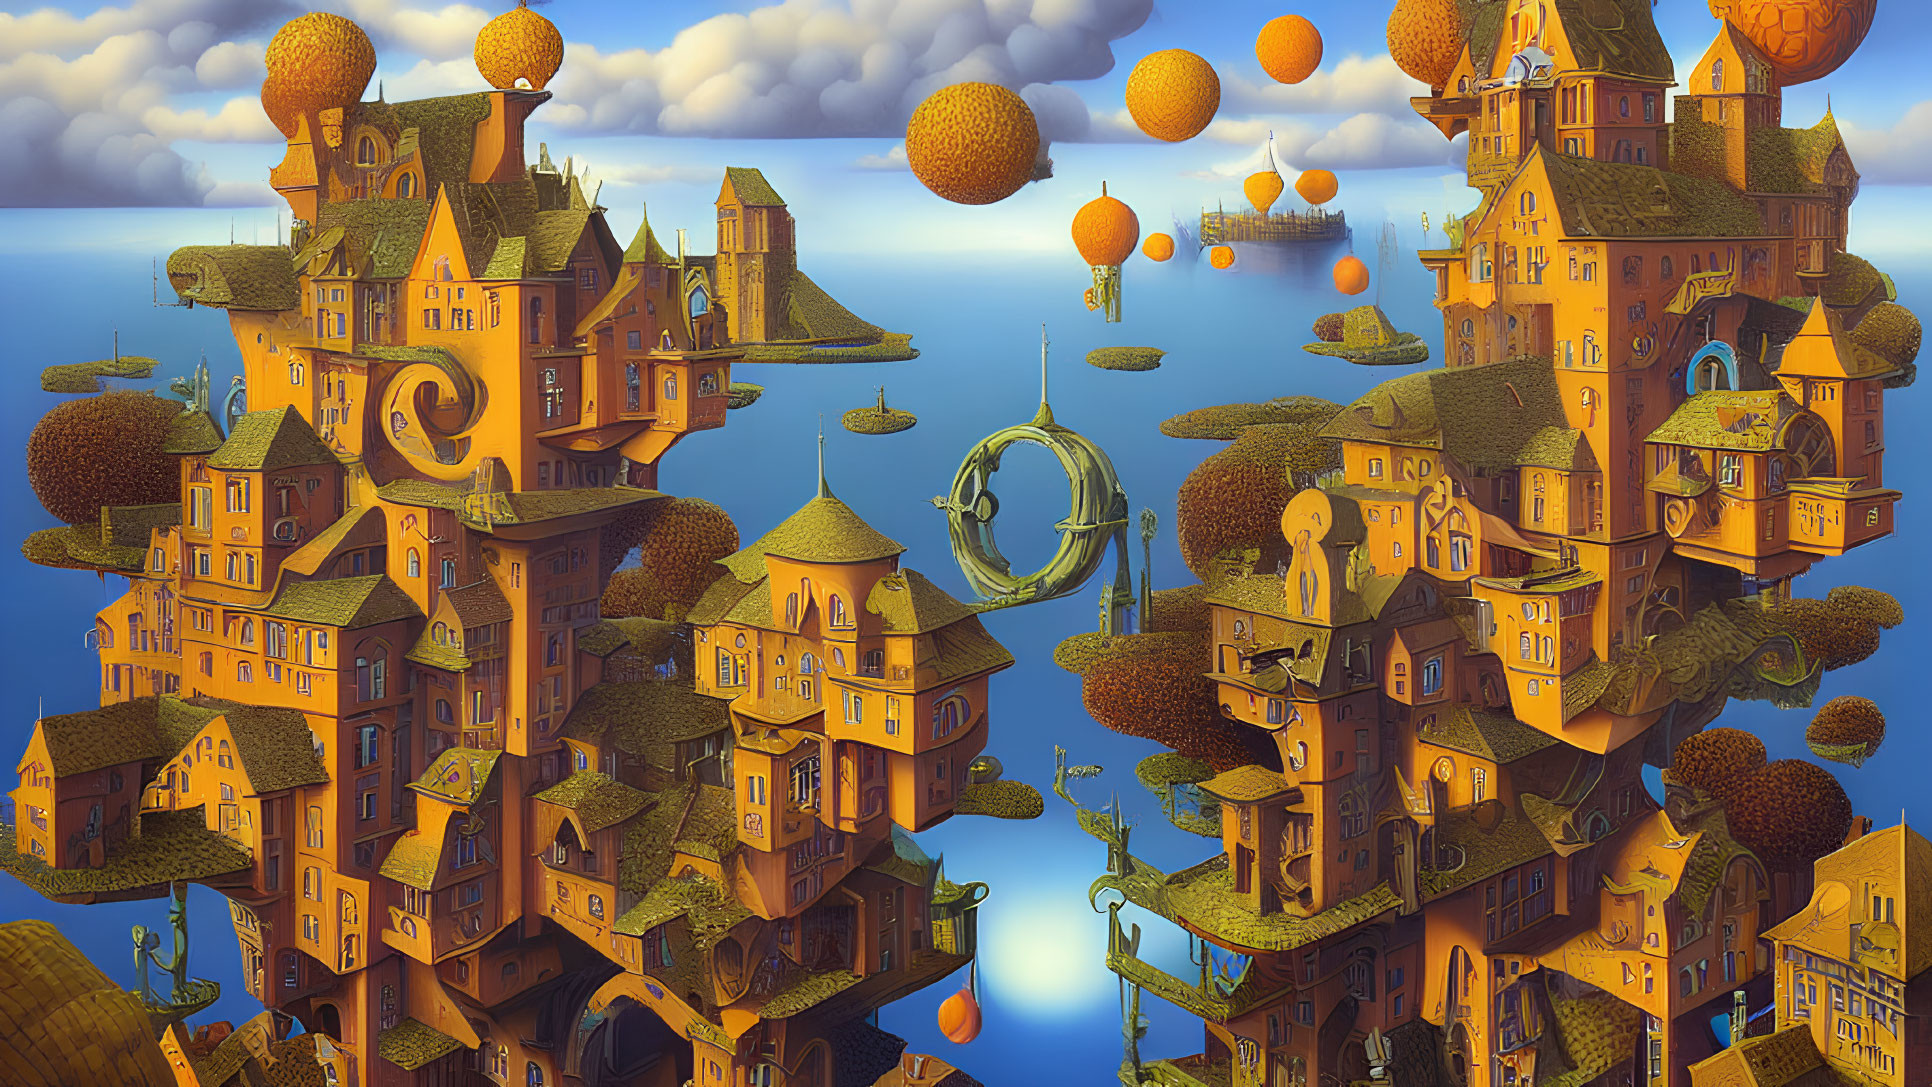 Surreal landscape with orange buildings, floating orbs, airships in blue sky